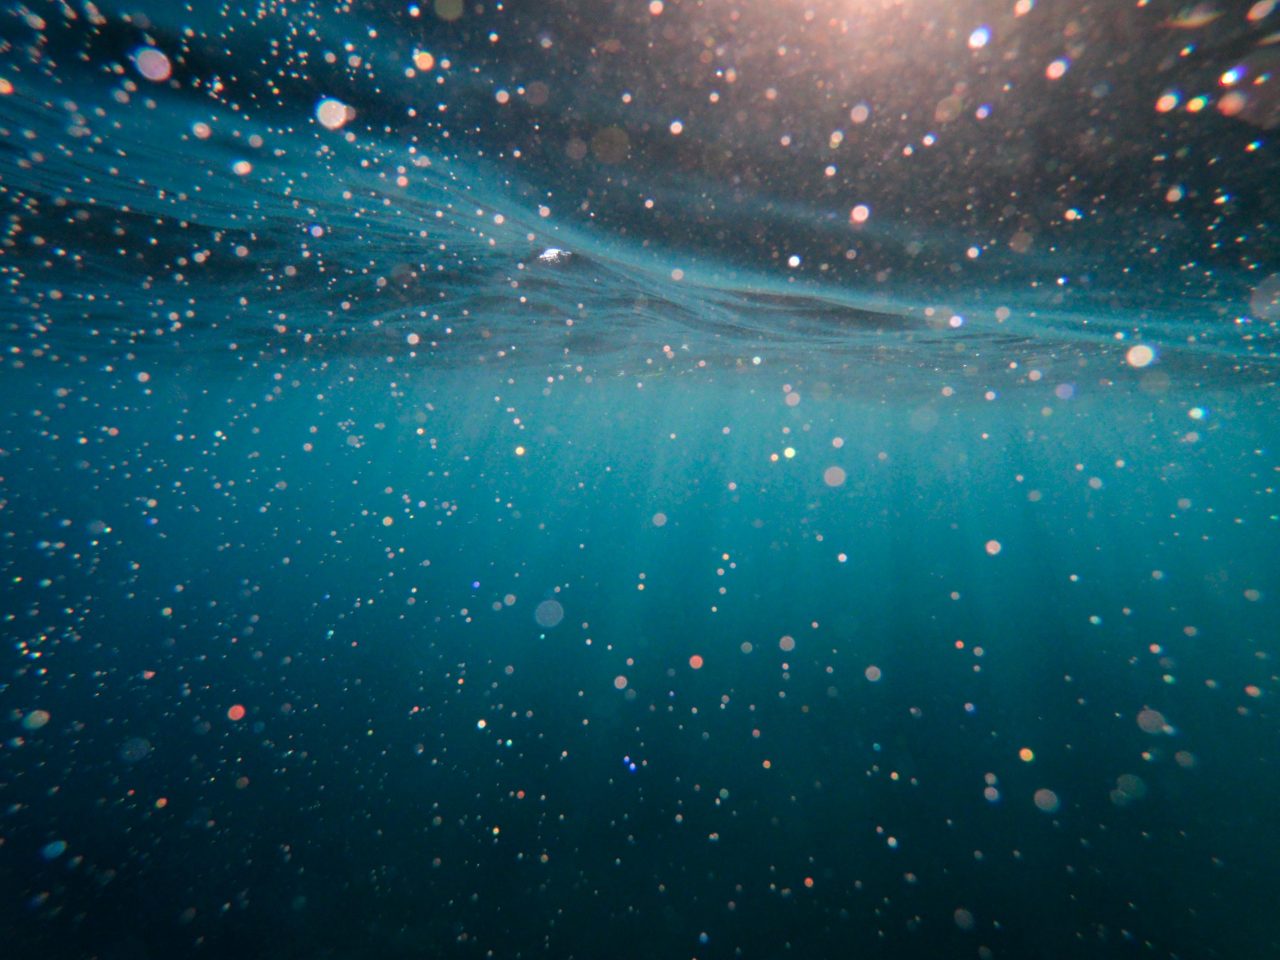 Light hitting particles in the ocean